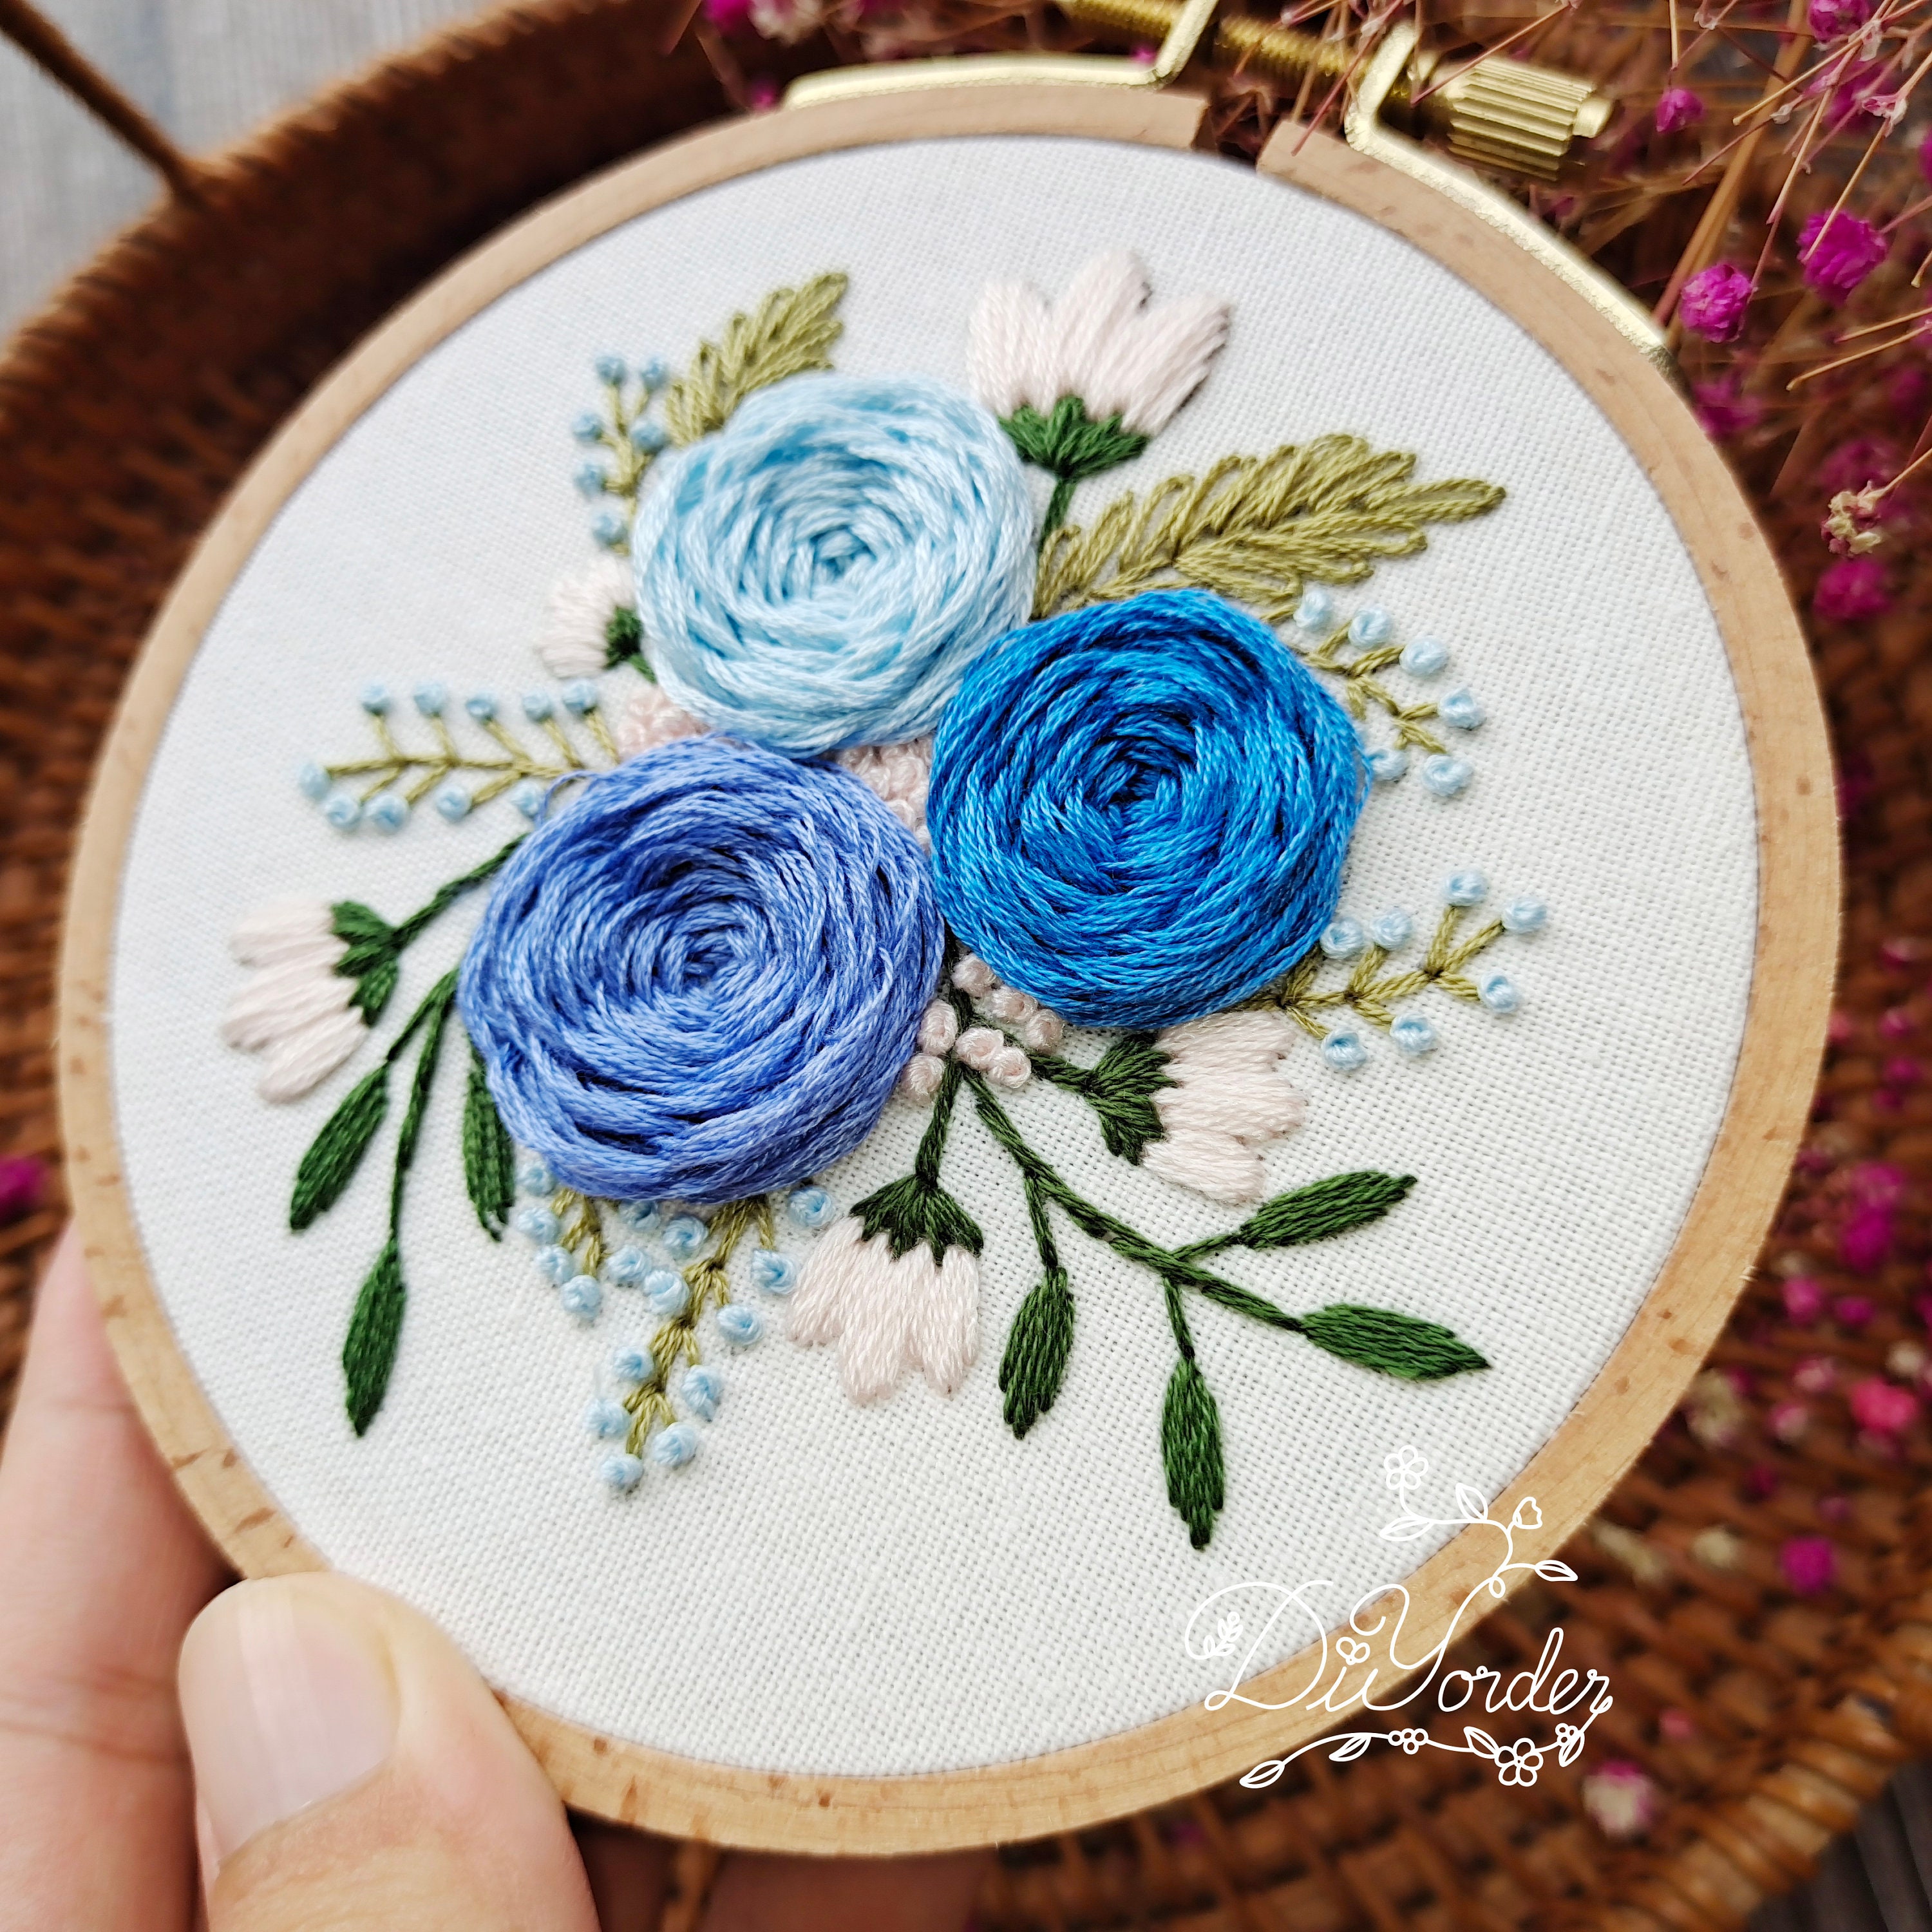 Crochet Embroidered Sampler: How To Embroider On Crochet Part 3 - Wagon  Wheel Roses 